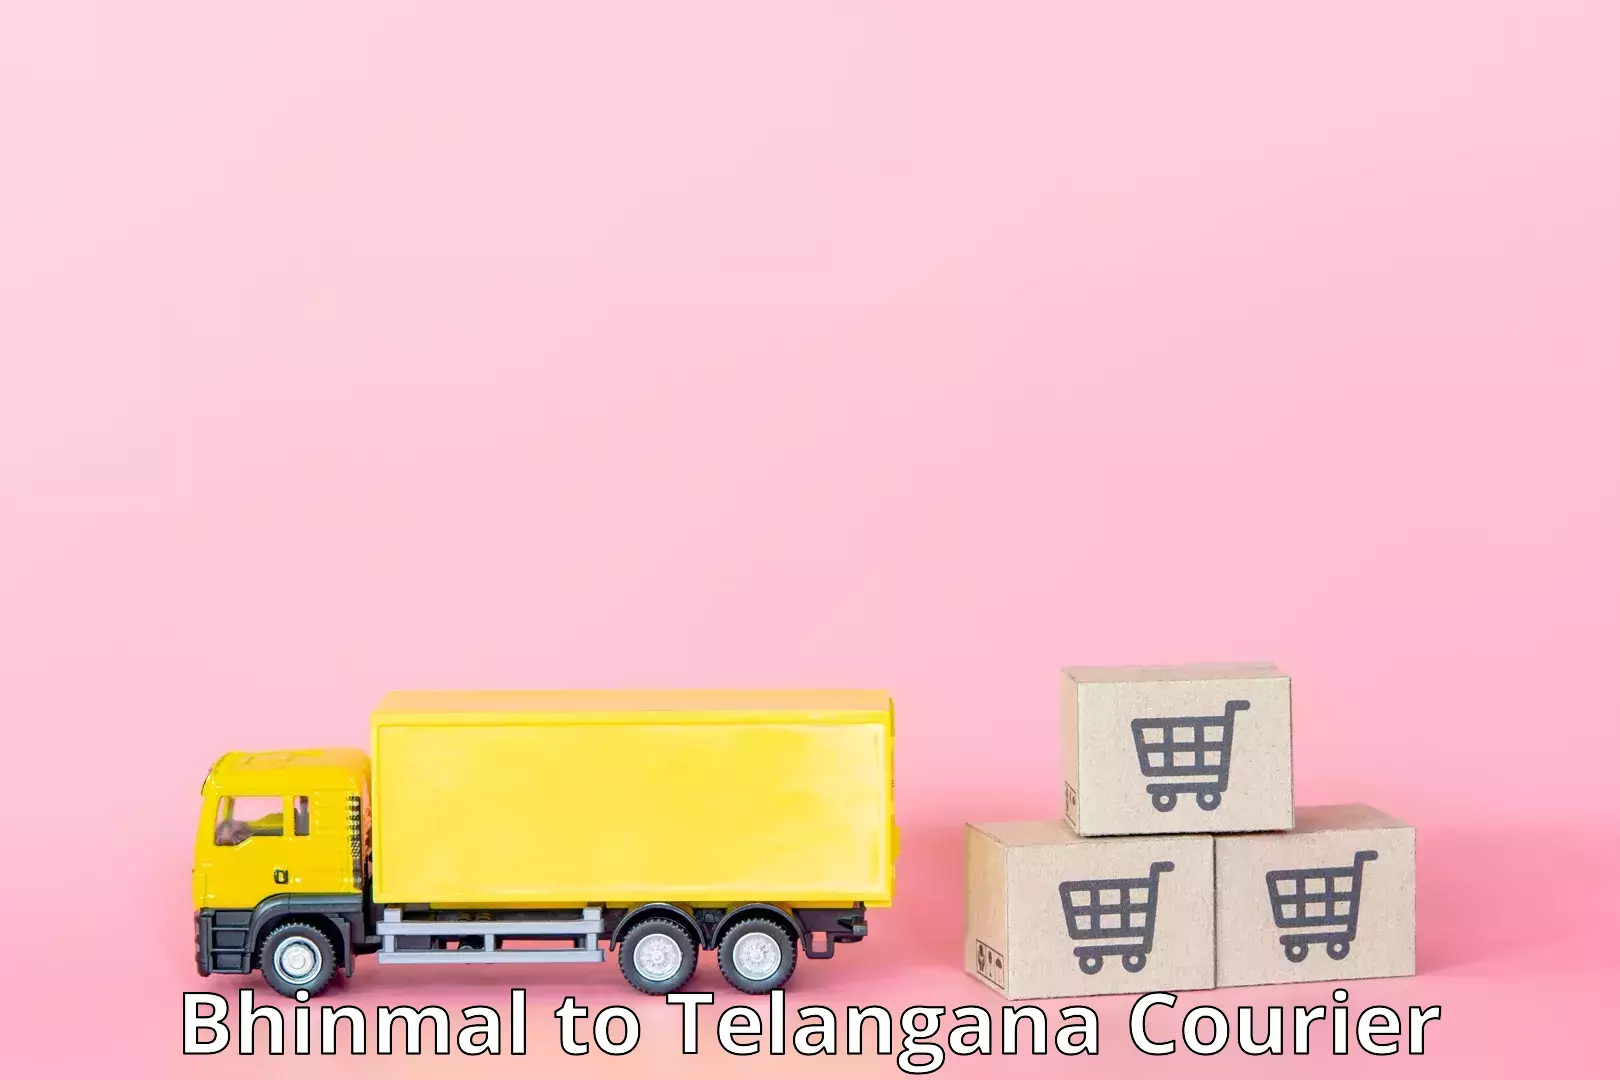 Efficient parcel tracking Bhinmal to Netrang